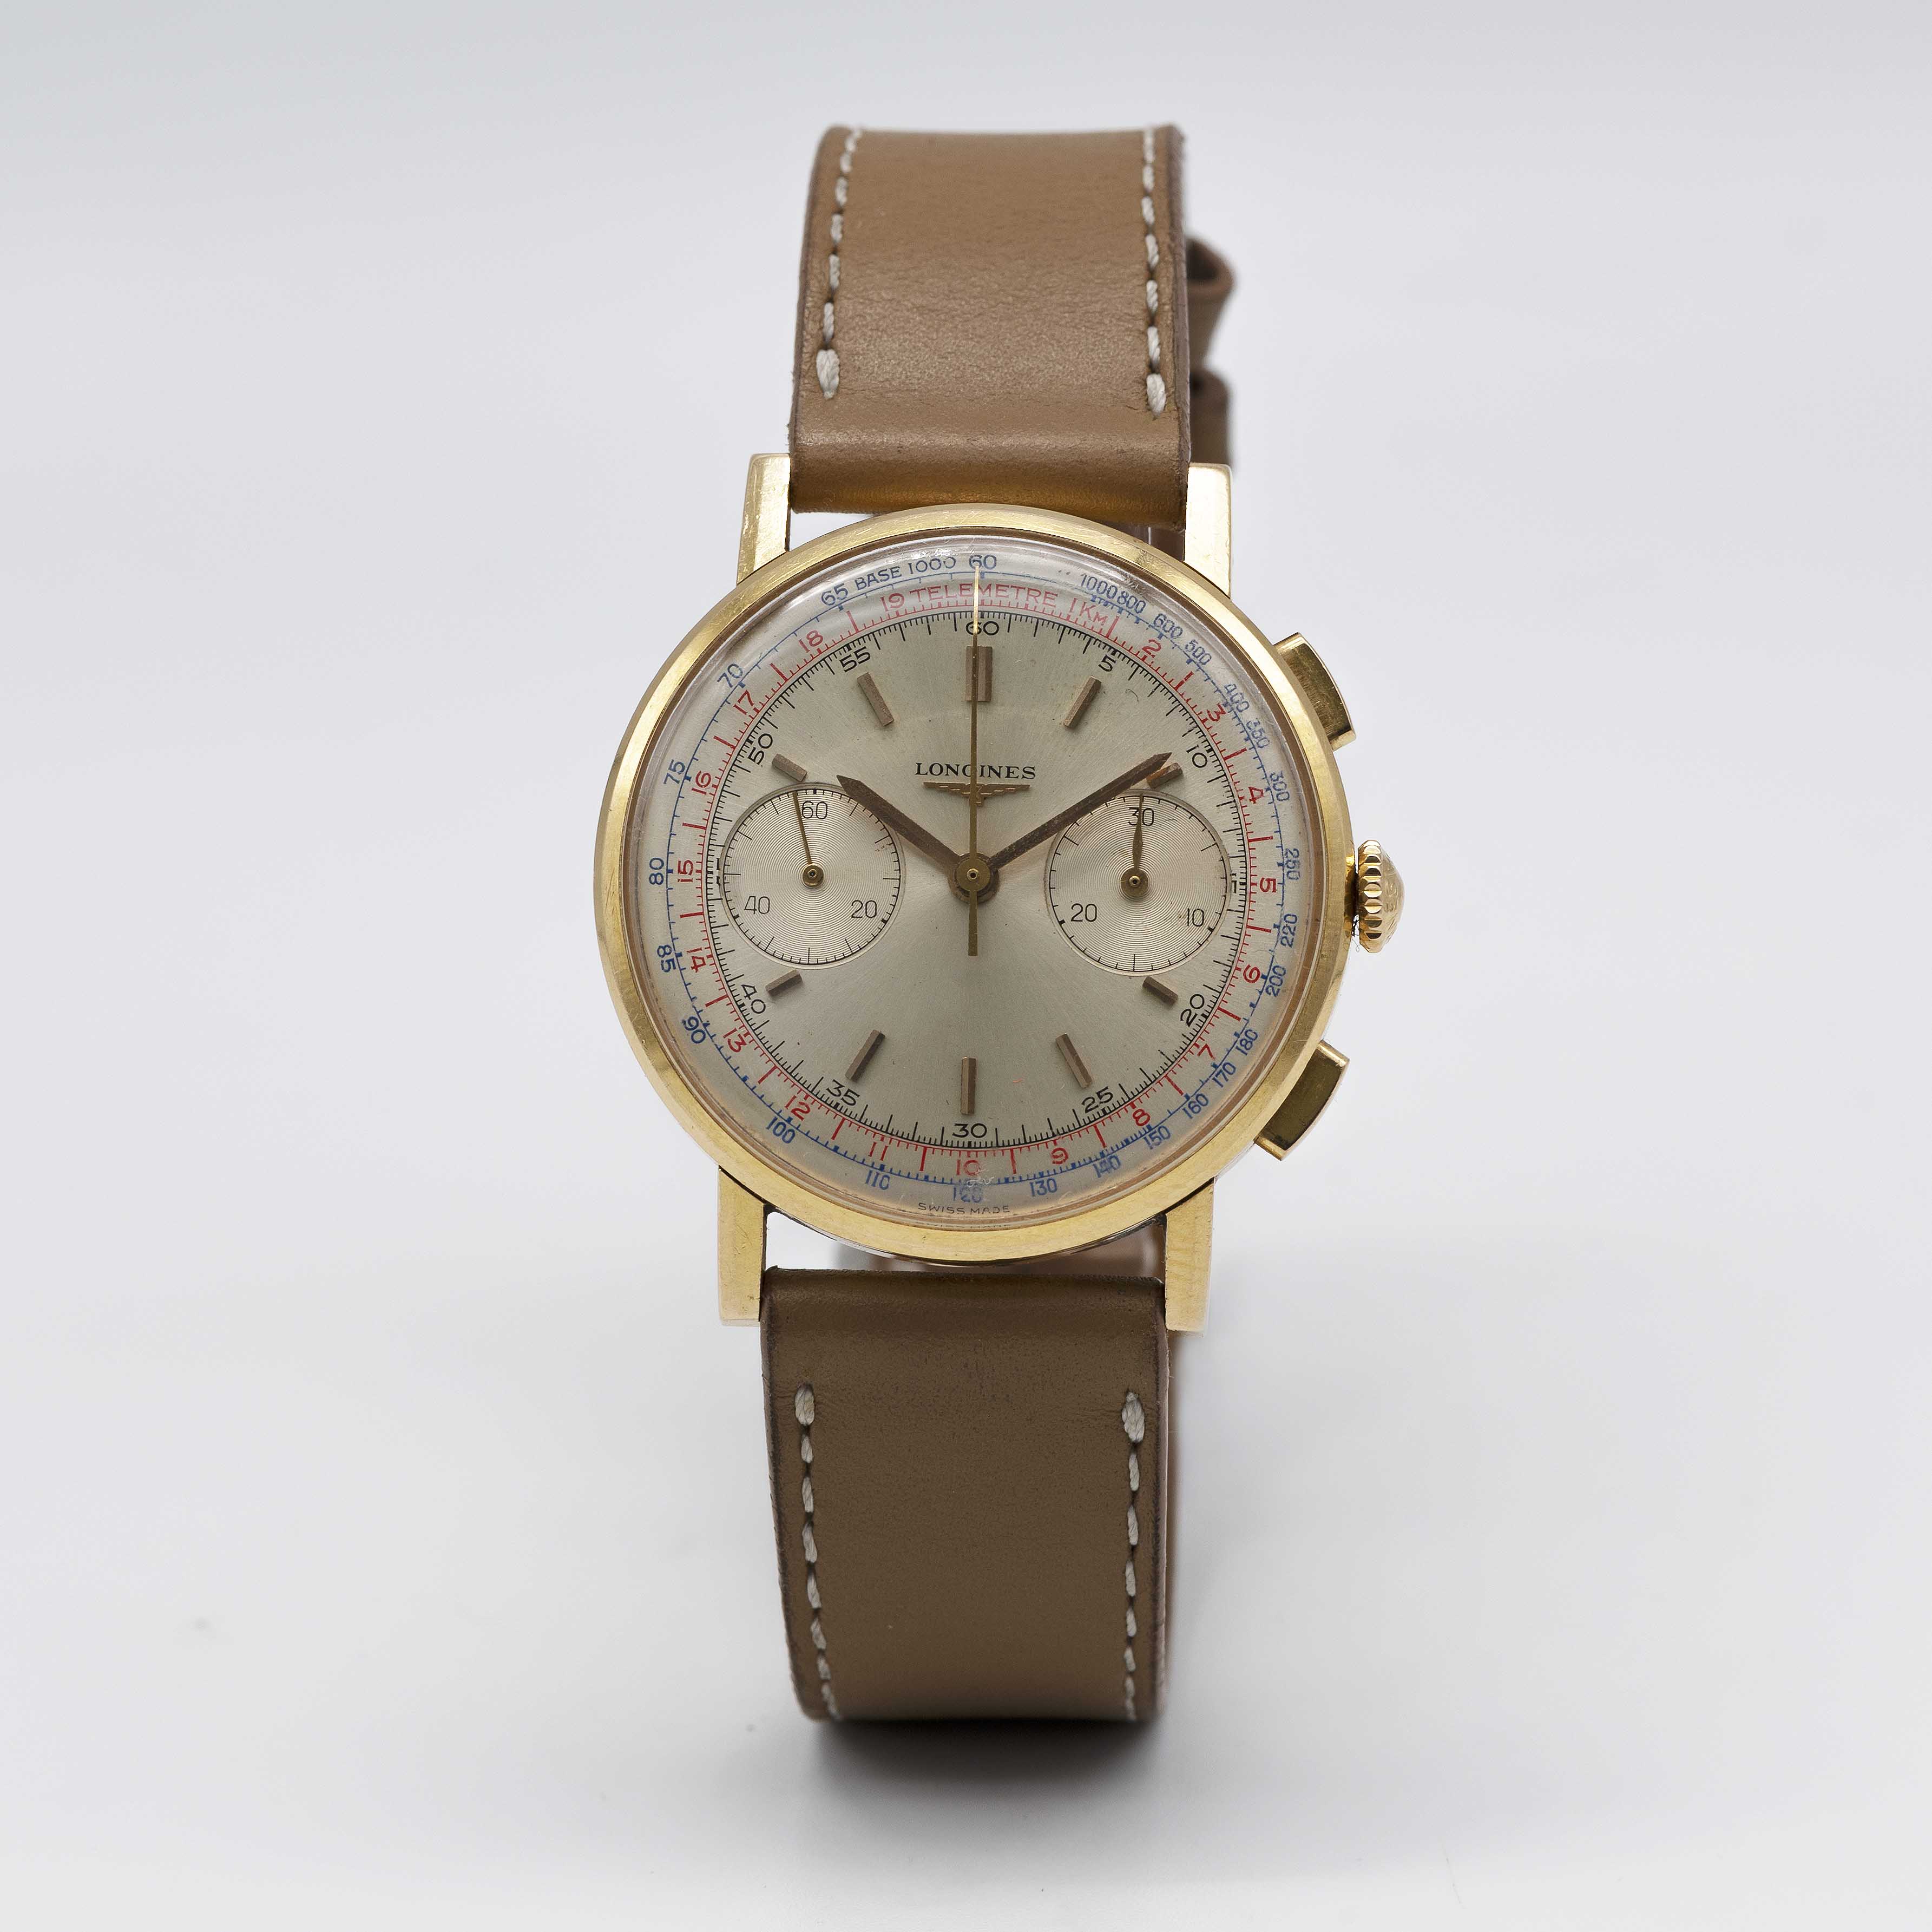 A GENTLEMAN'S 18K SOLID YELLOW GOLD LONGINES FLYBACK CHRONOGRAPH WRIST WATCH DATED 1969, REF. 7414 - Image 3 of 9